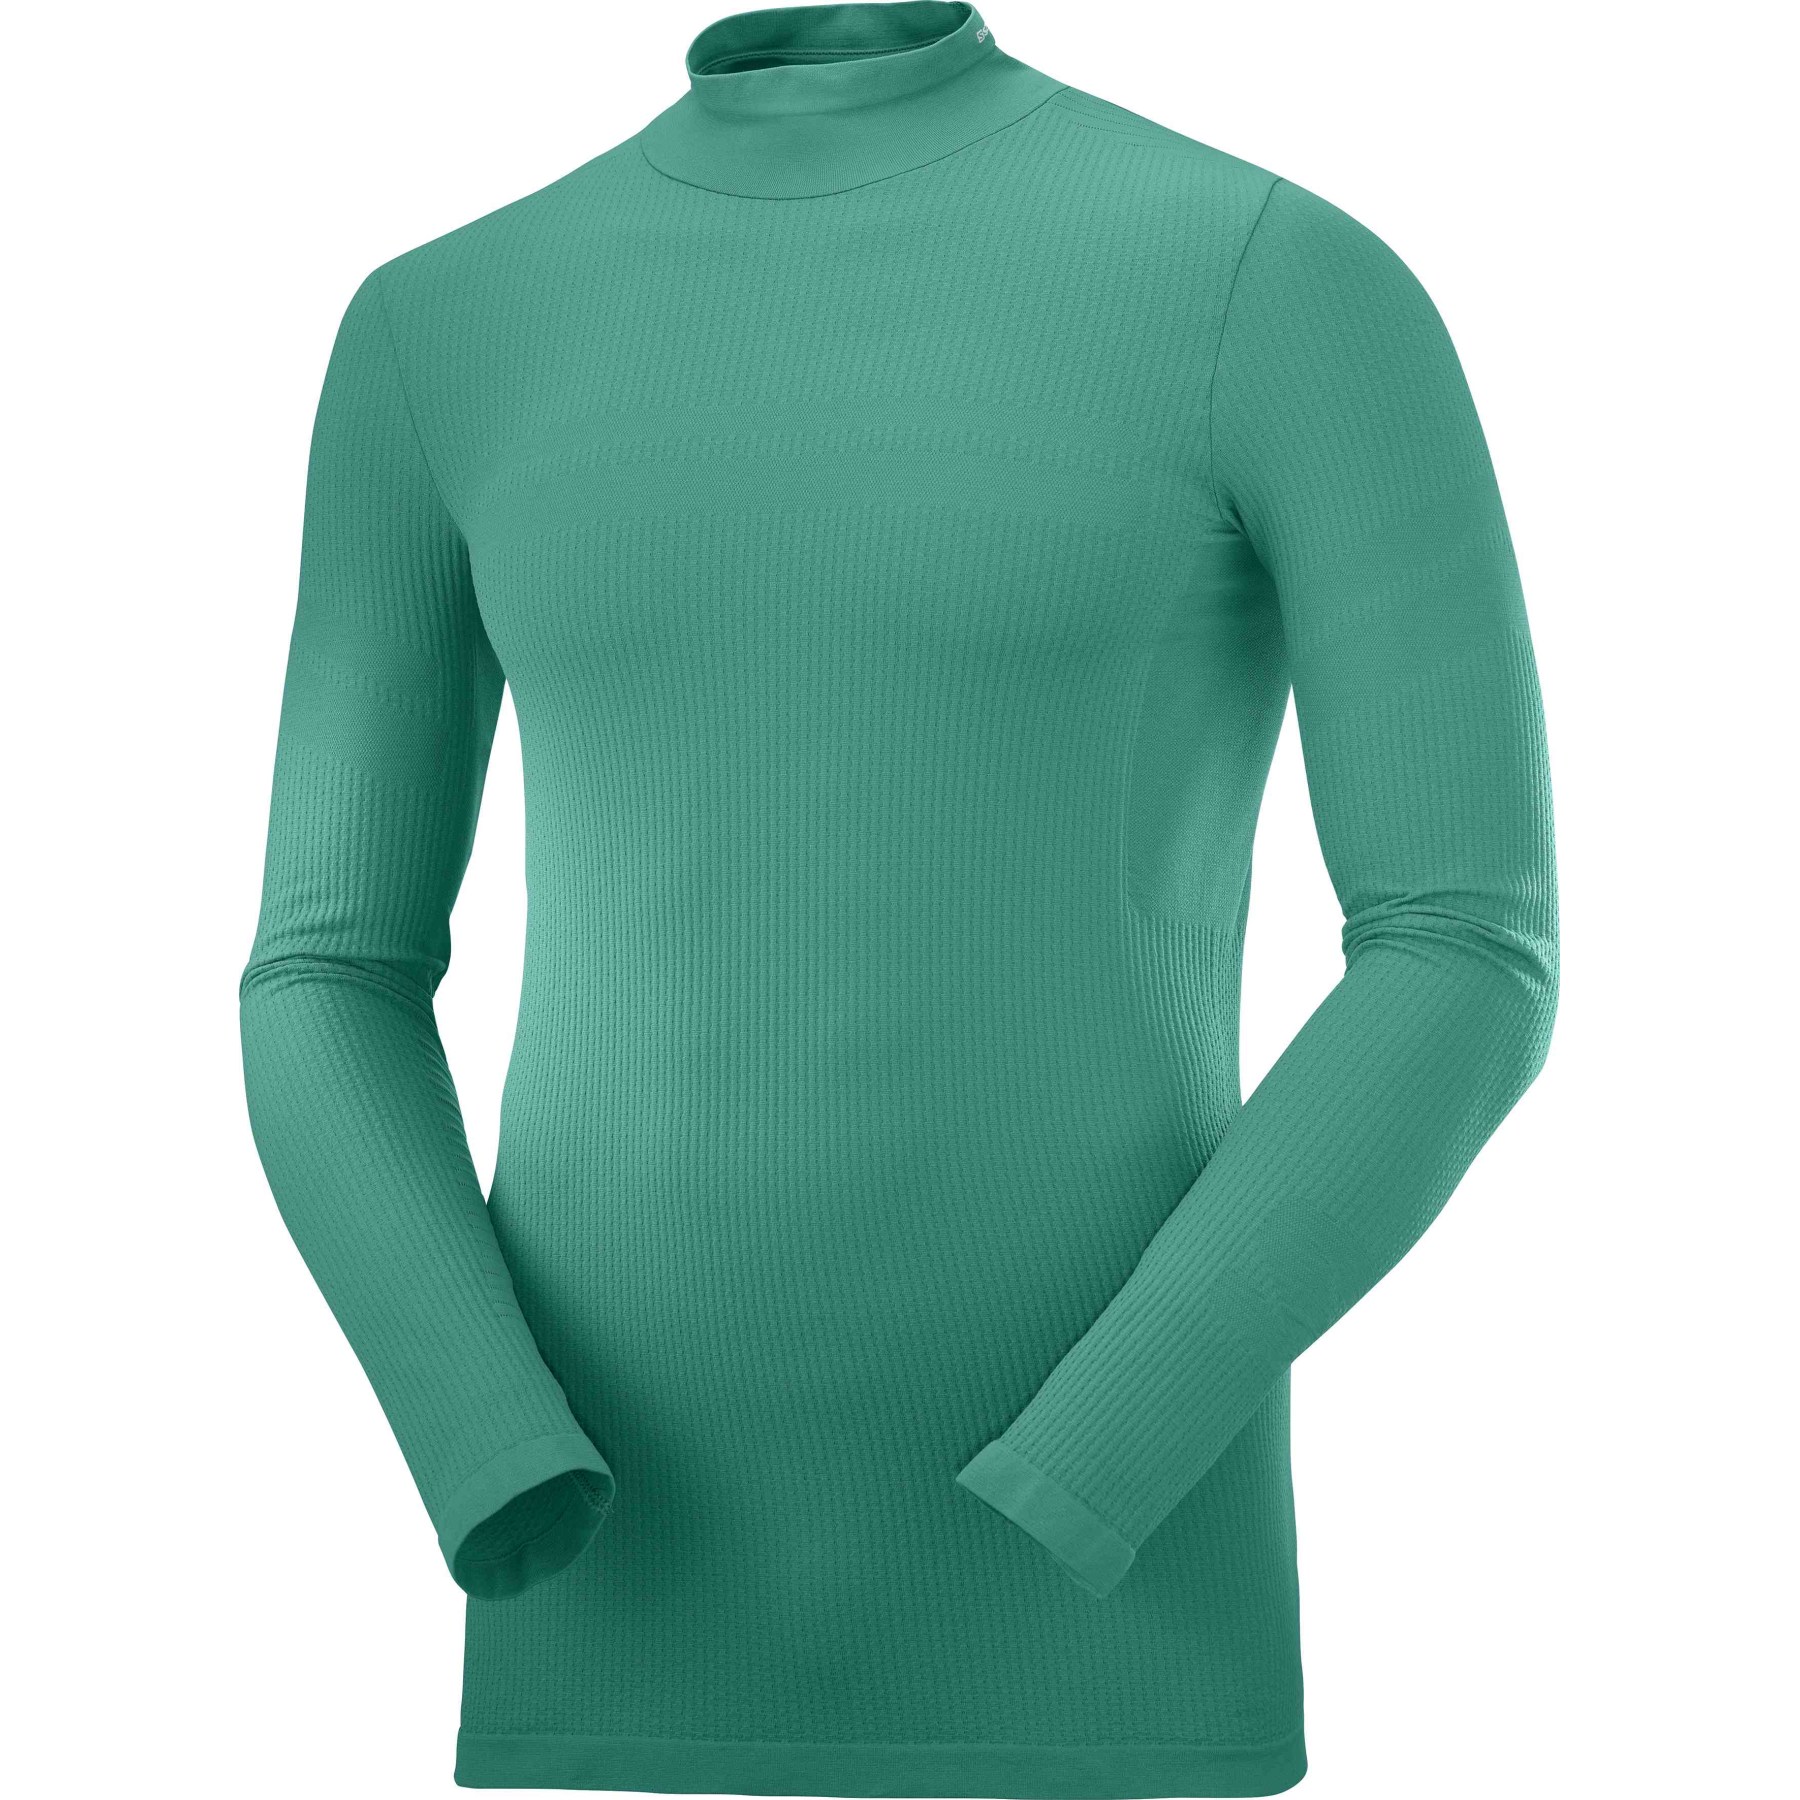 Picture of Salomon Sntial Warm Baselayer Longsleeve Shirt - pacific